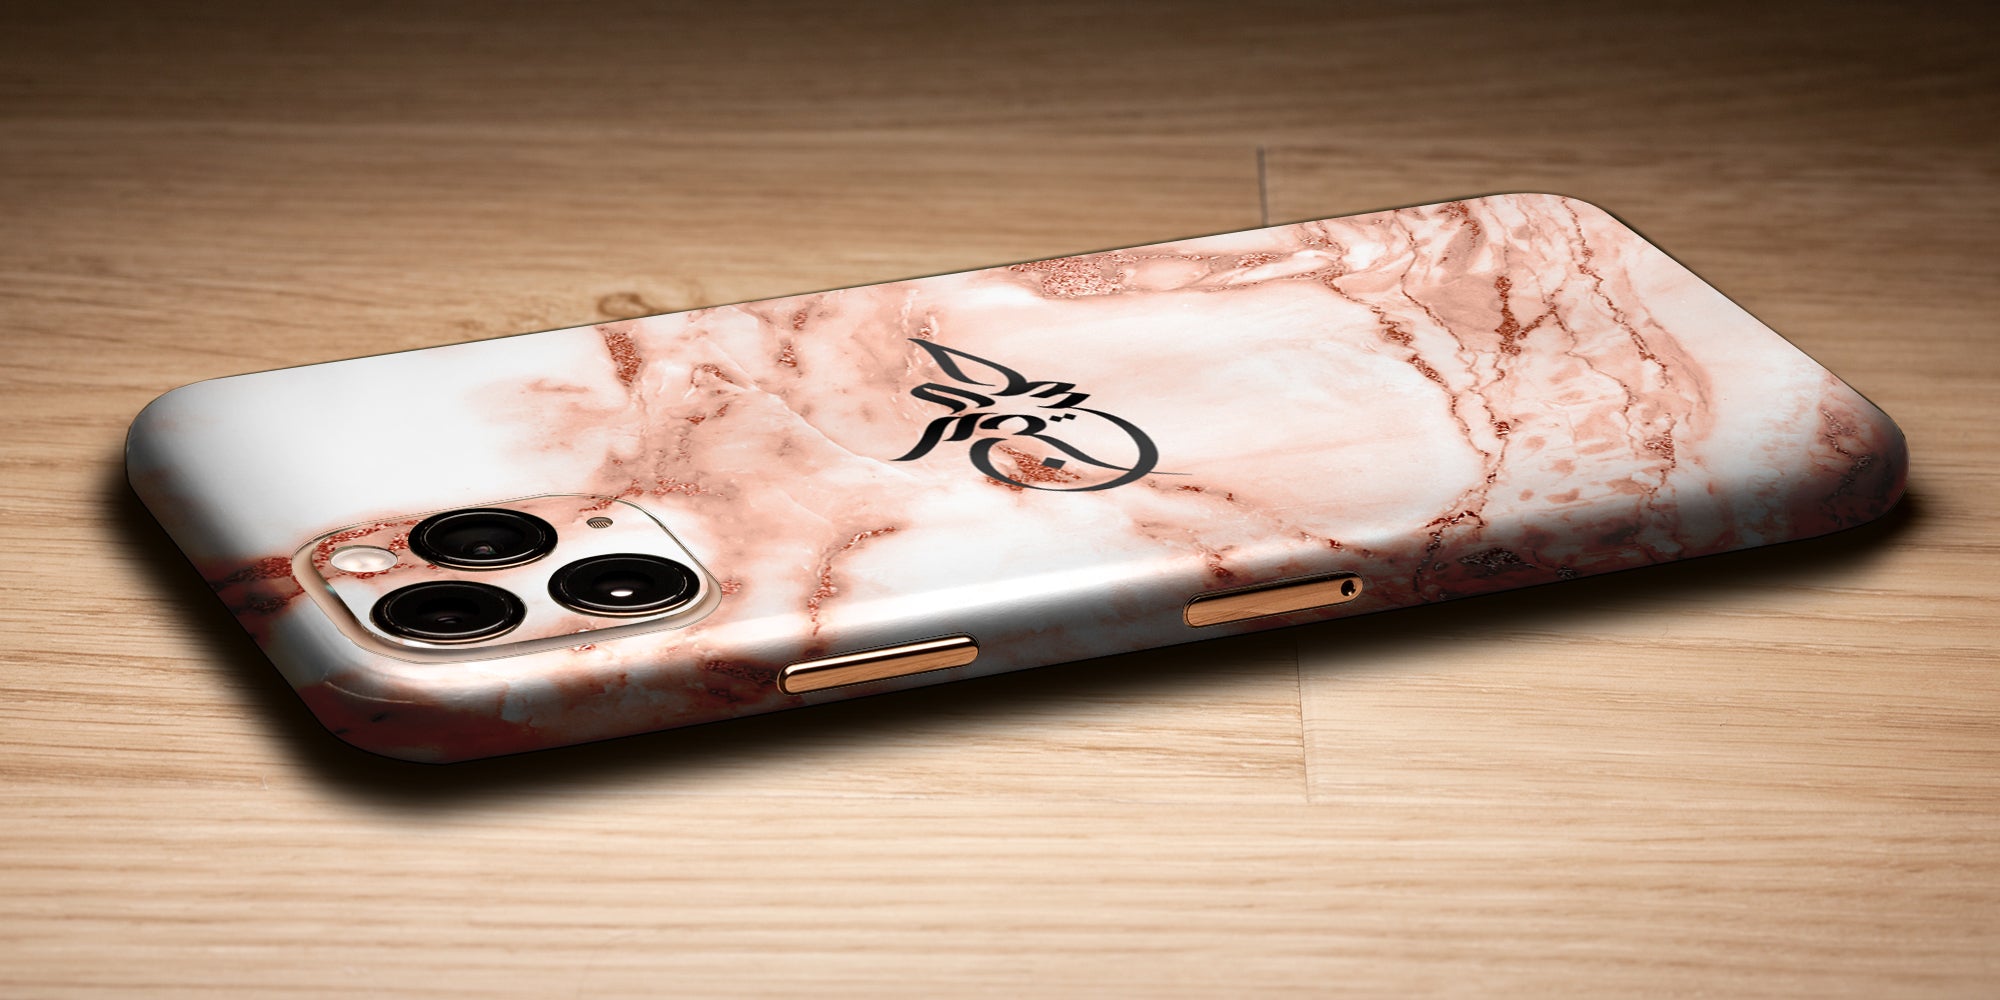 Marble Design Decal Skin With Personalised Arabic Name Phone Wrap - Pink